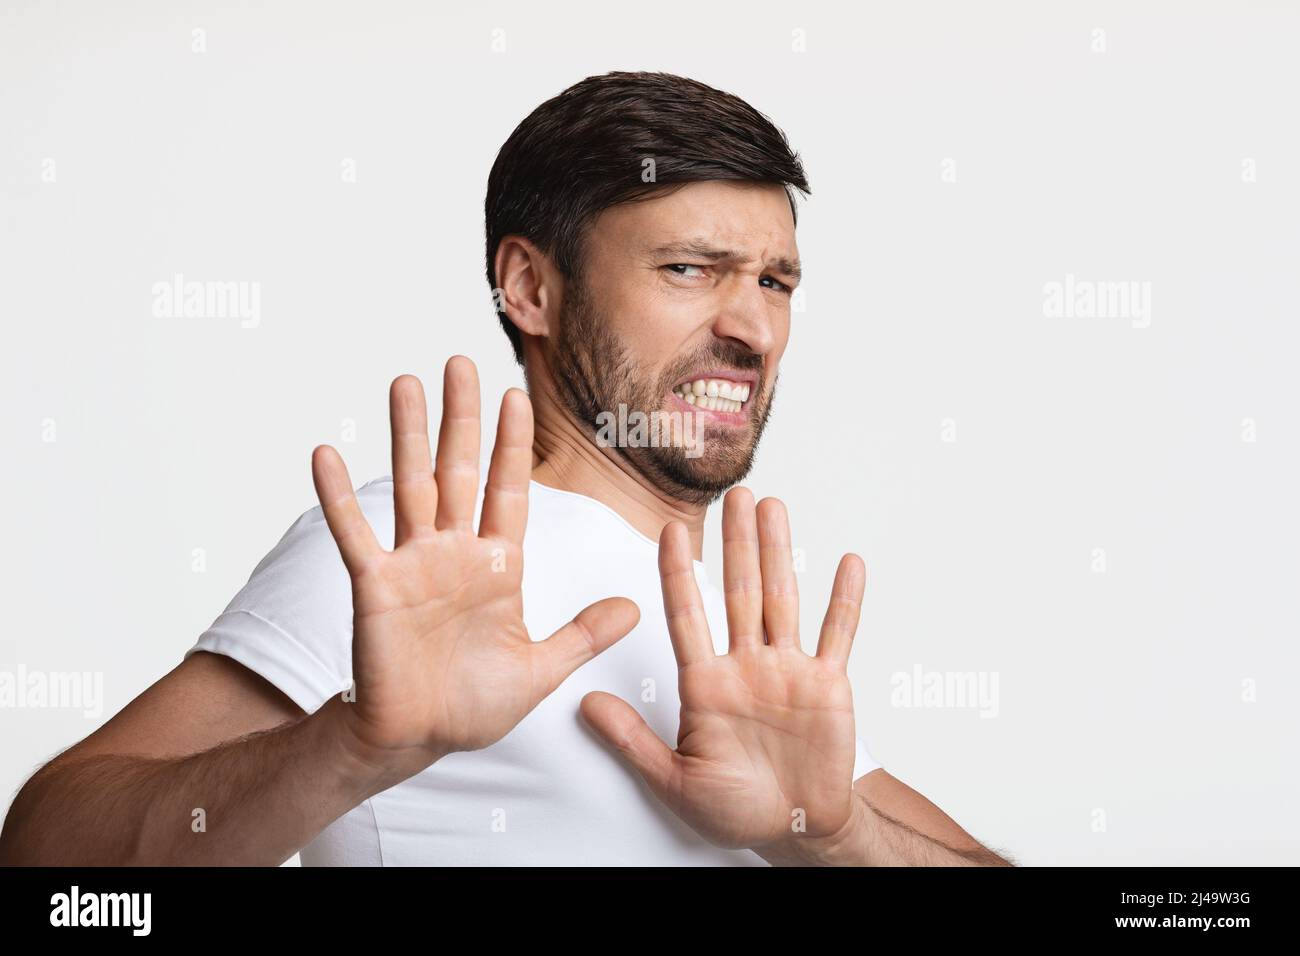 Disgusted Man Frowning Gesturing Stop Over White Background Stock Photo